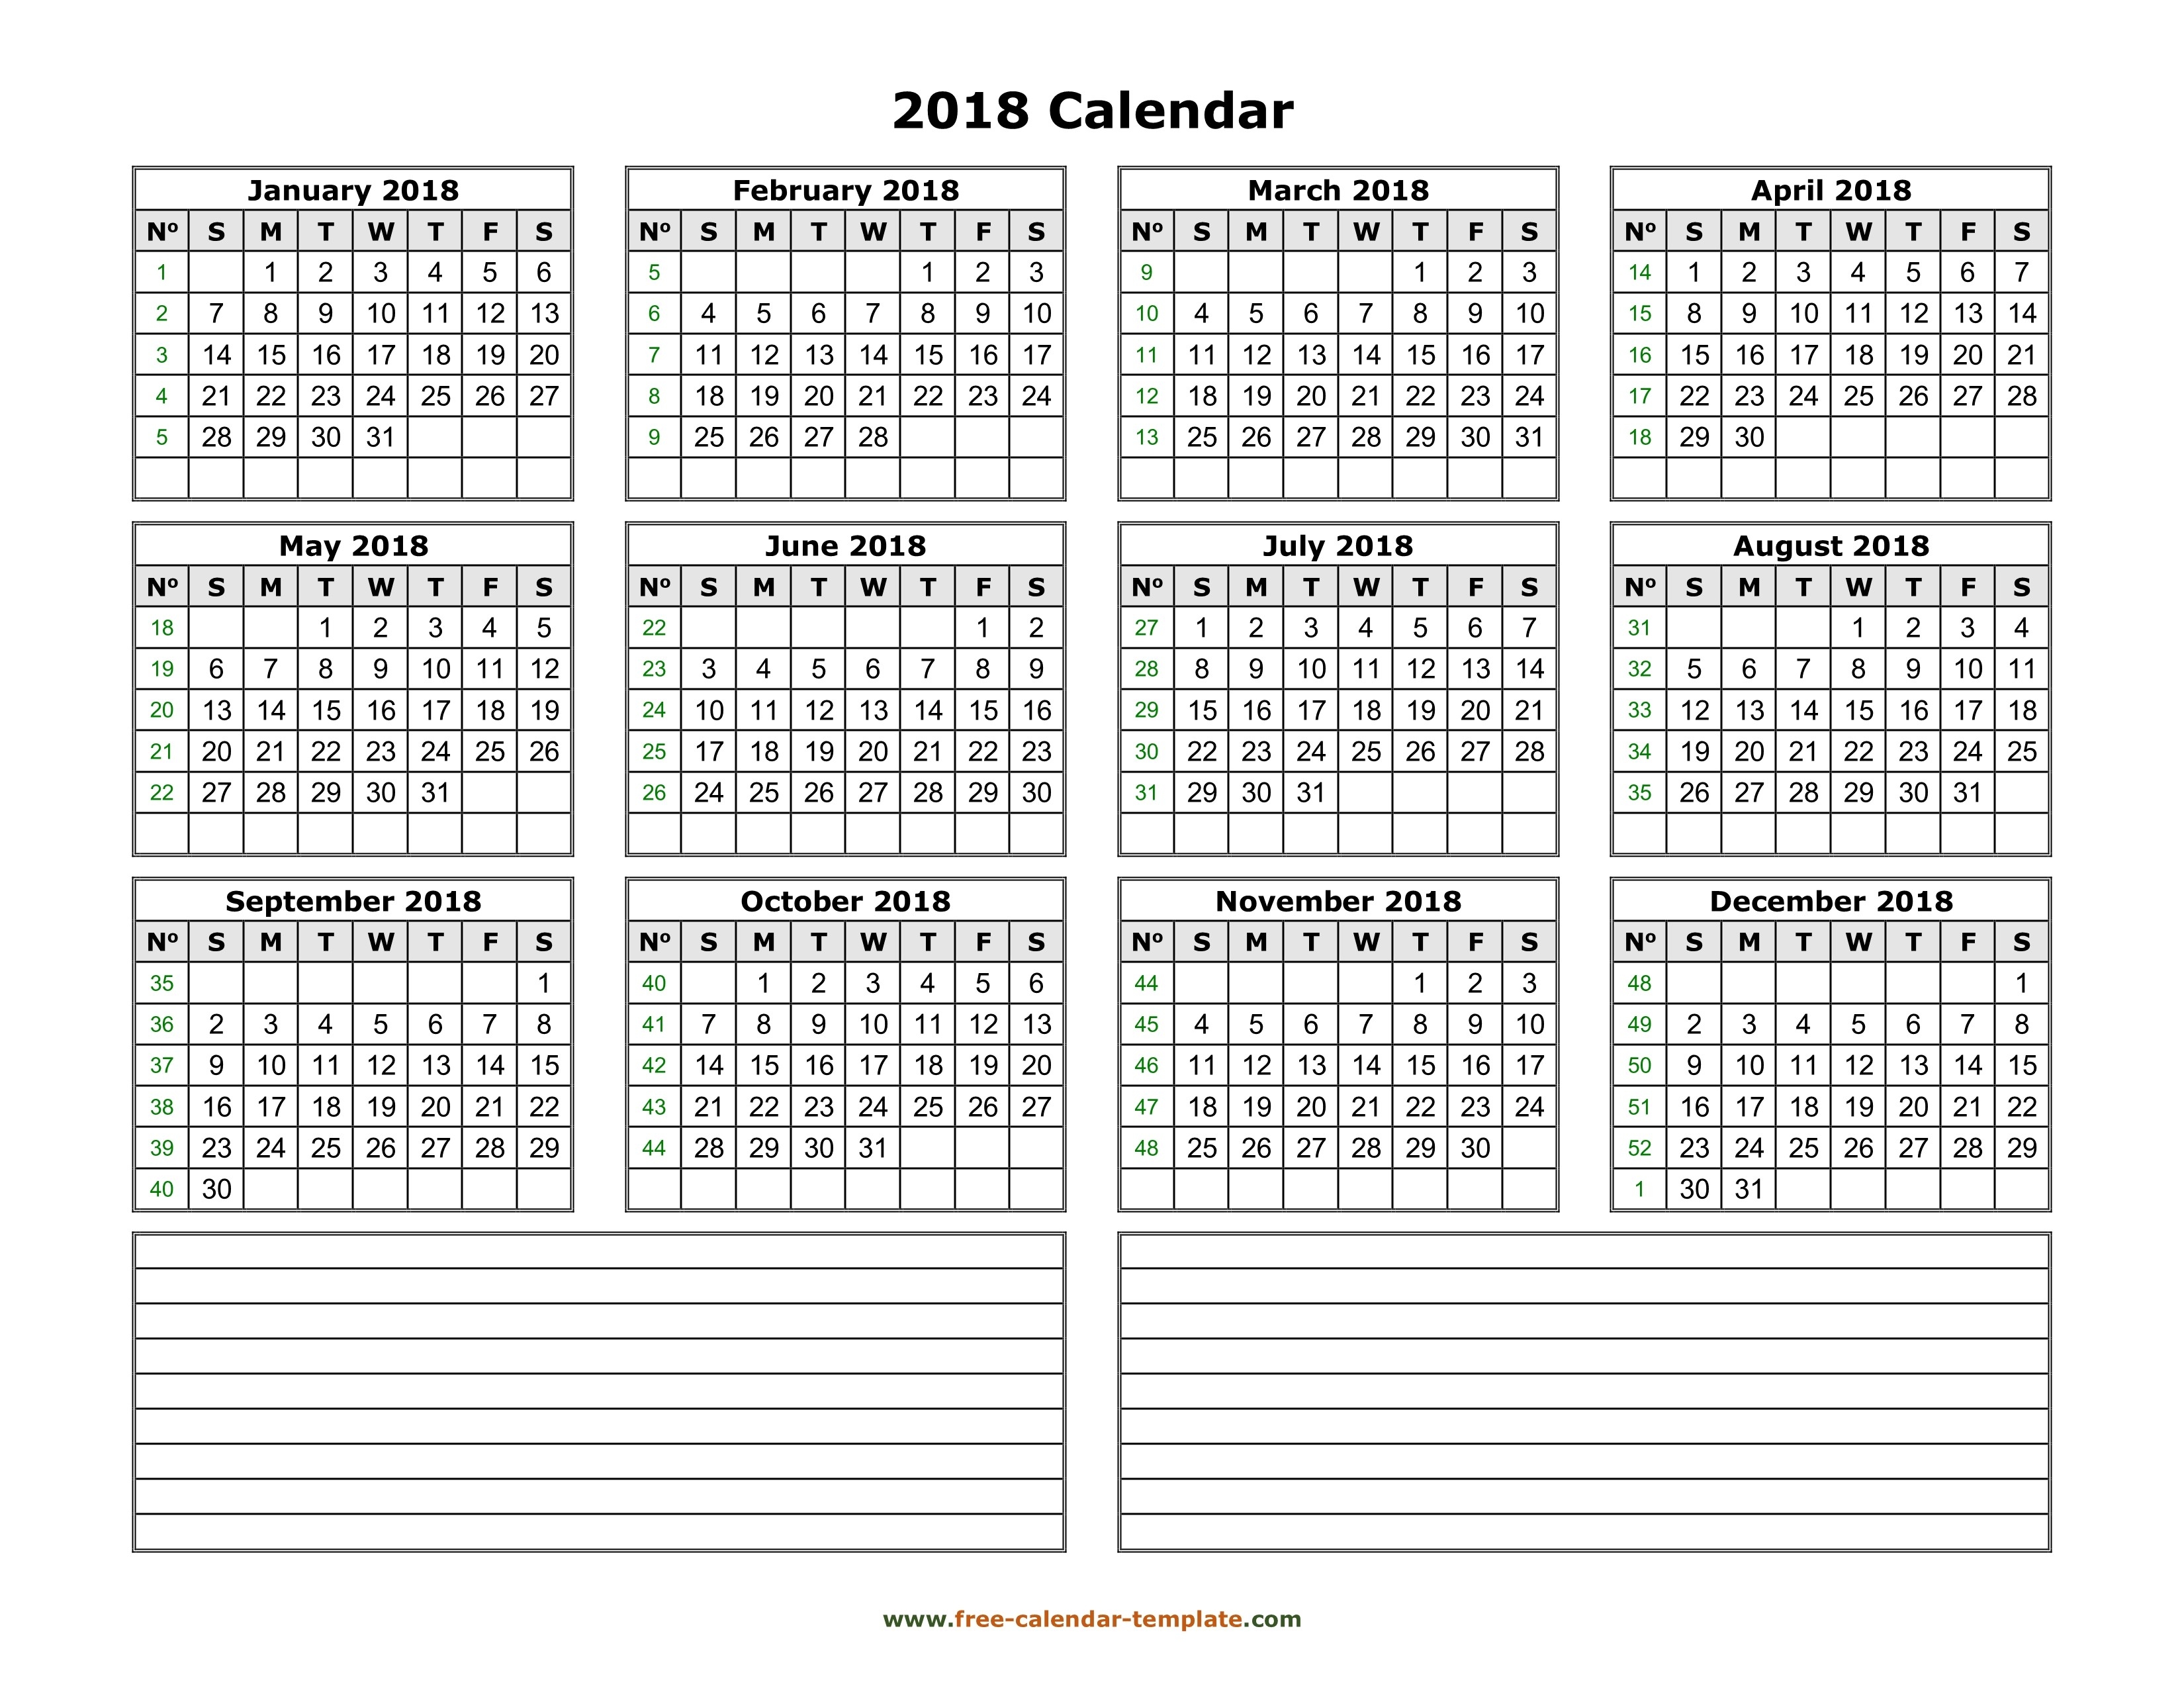 Yearly 2018 Calendar Printable With Space For Notes | Free-Printable Calendar Template With Notes